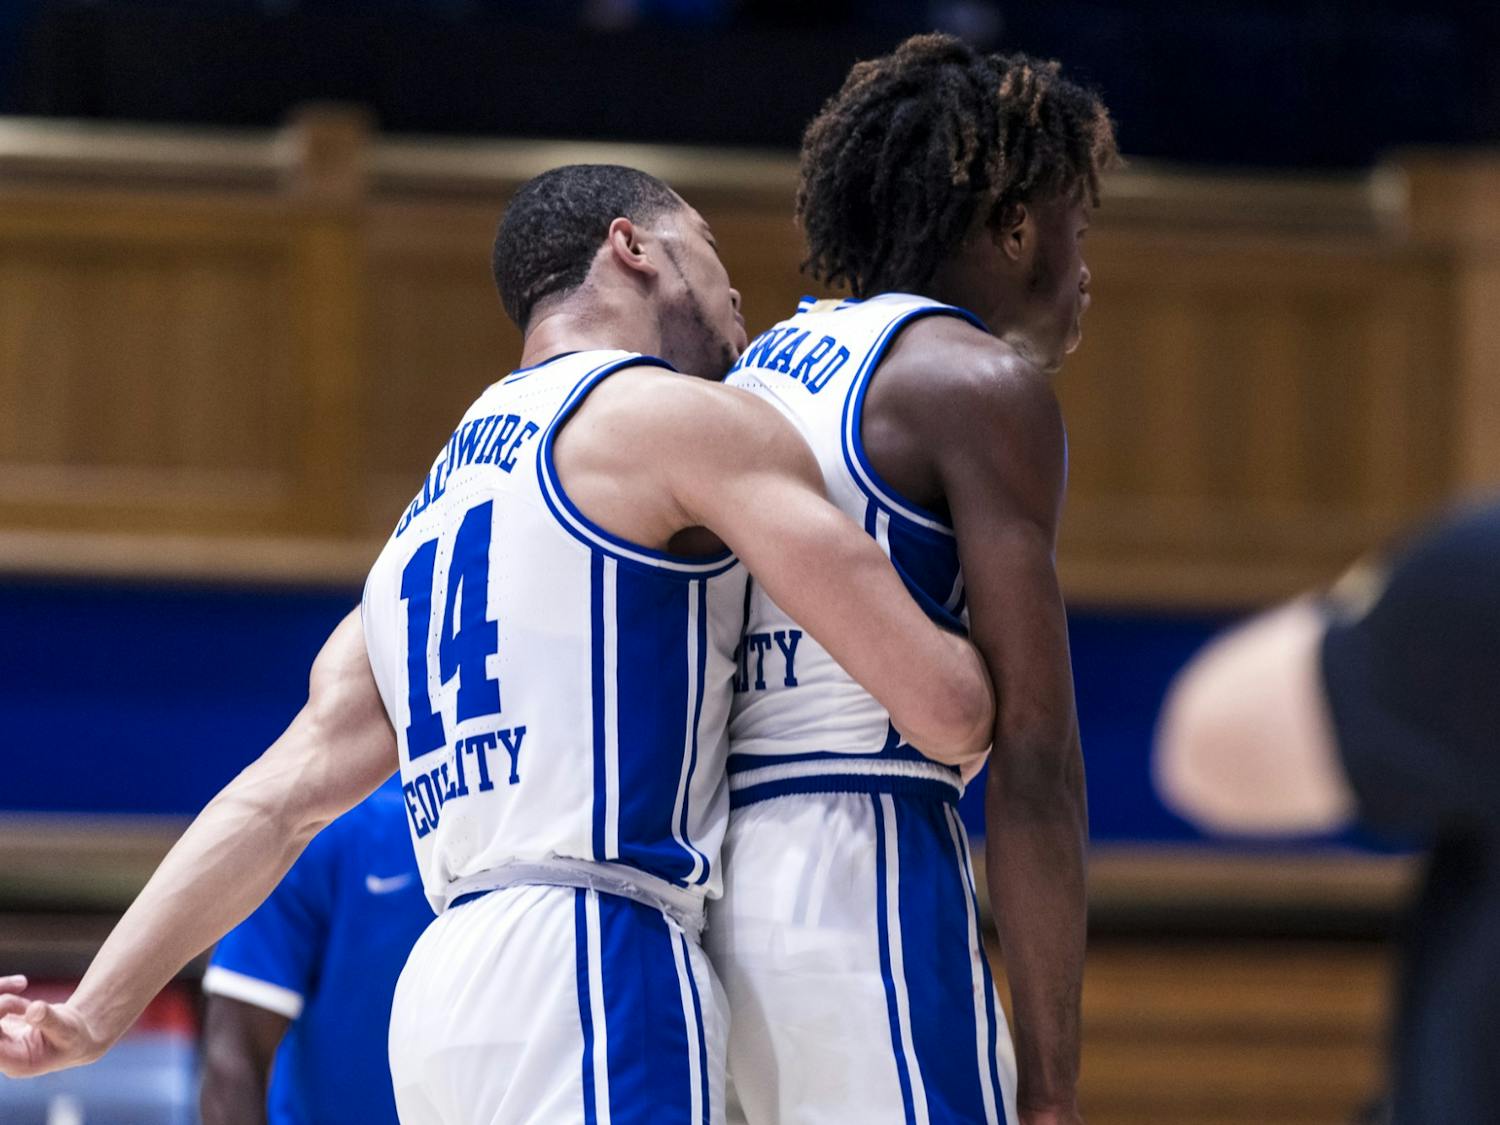 With its 22-point win against Bellarmine, Duke is trying to show that its matchup with Michigan State was just an early season mishap.